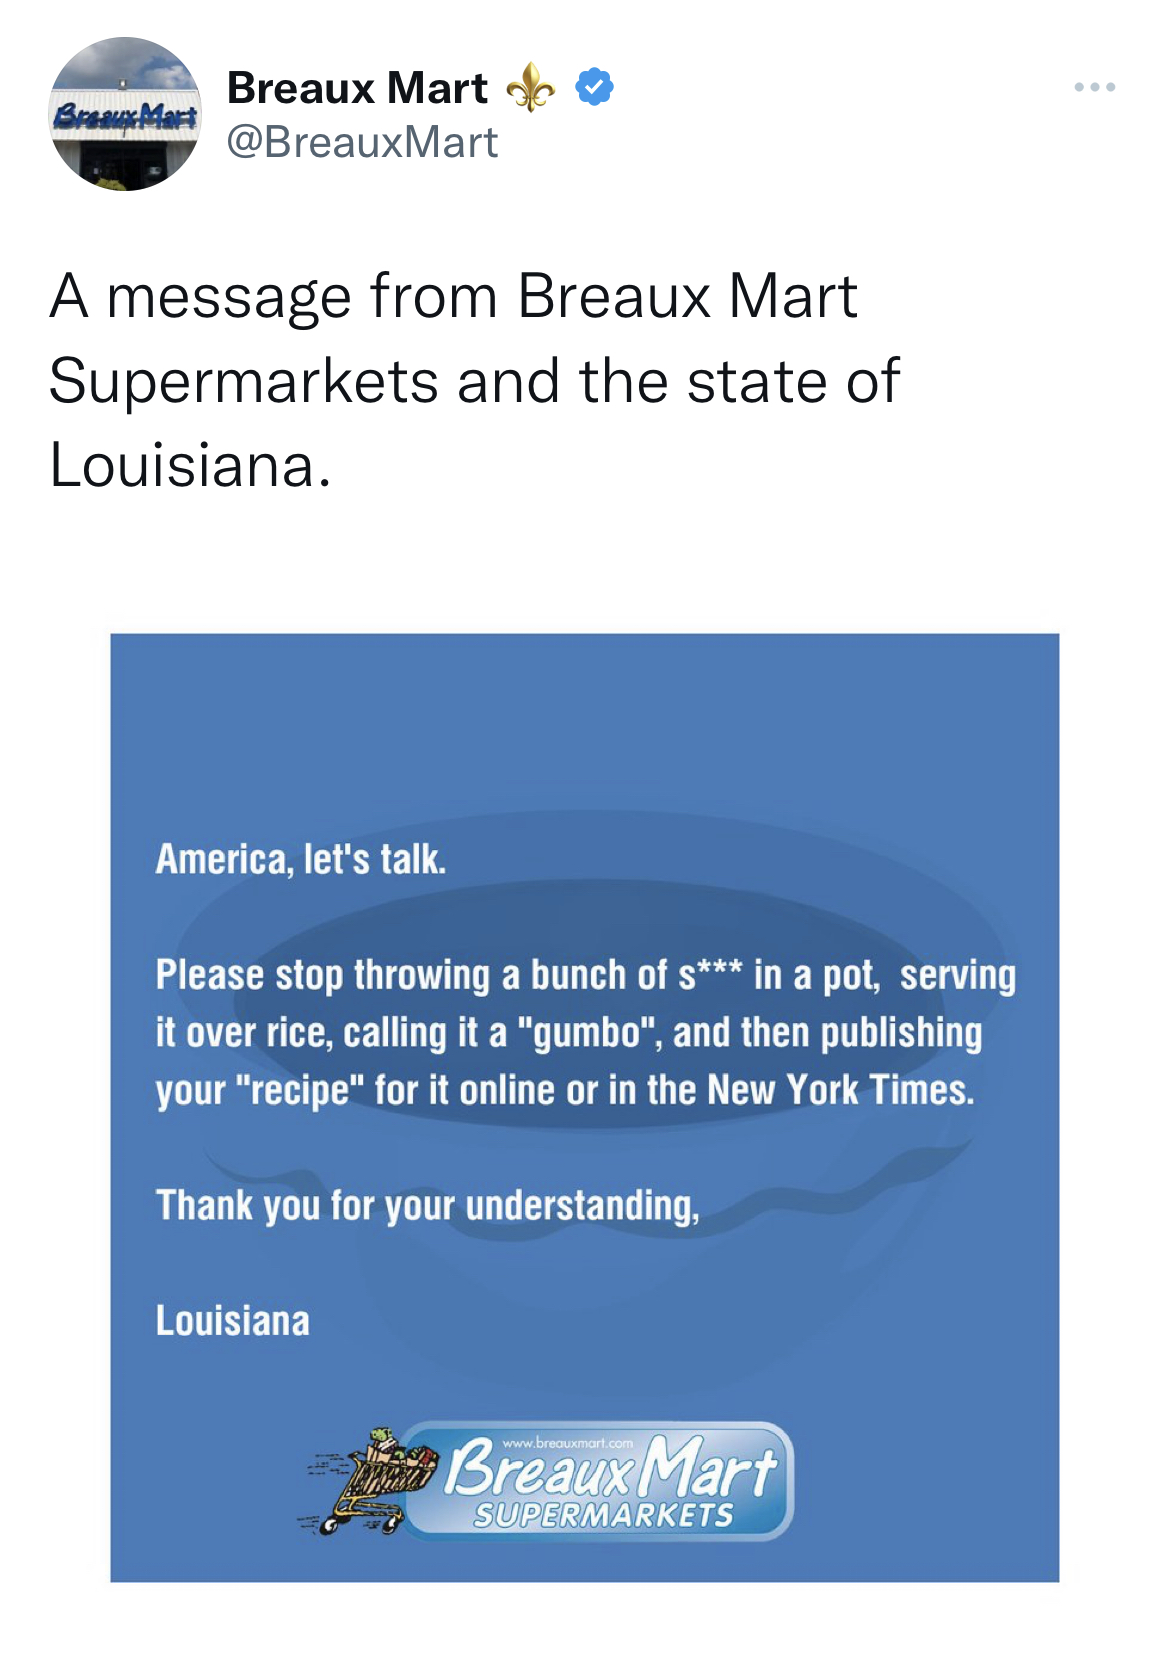 M&M's message spoofs - water - Breaux Mart A message from Breaux Mart Supermarkets and the state of Louisiana. America, let's talk. Please stop throwing a bunch of s in a pot, serving it over rice, calling it a "gumbo", and then publishing your "recipe" f